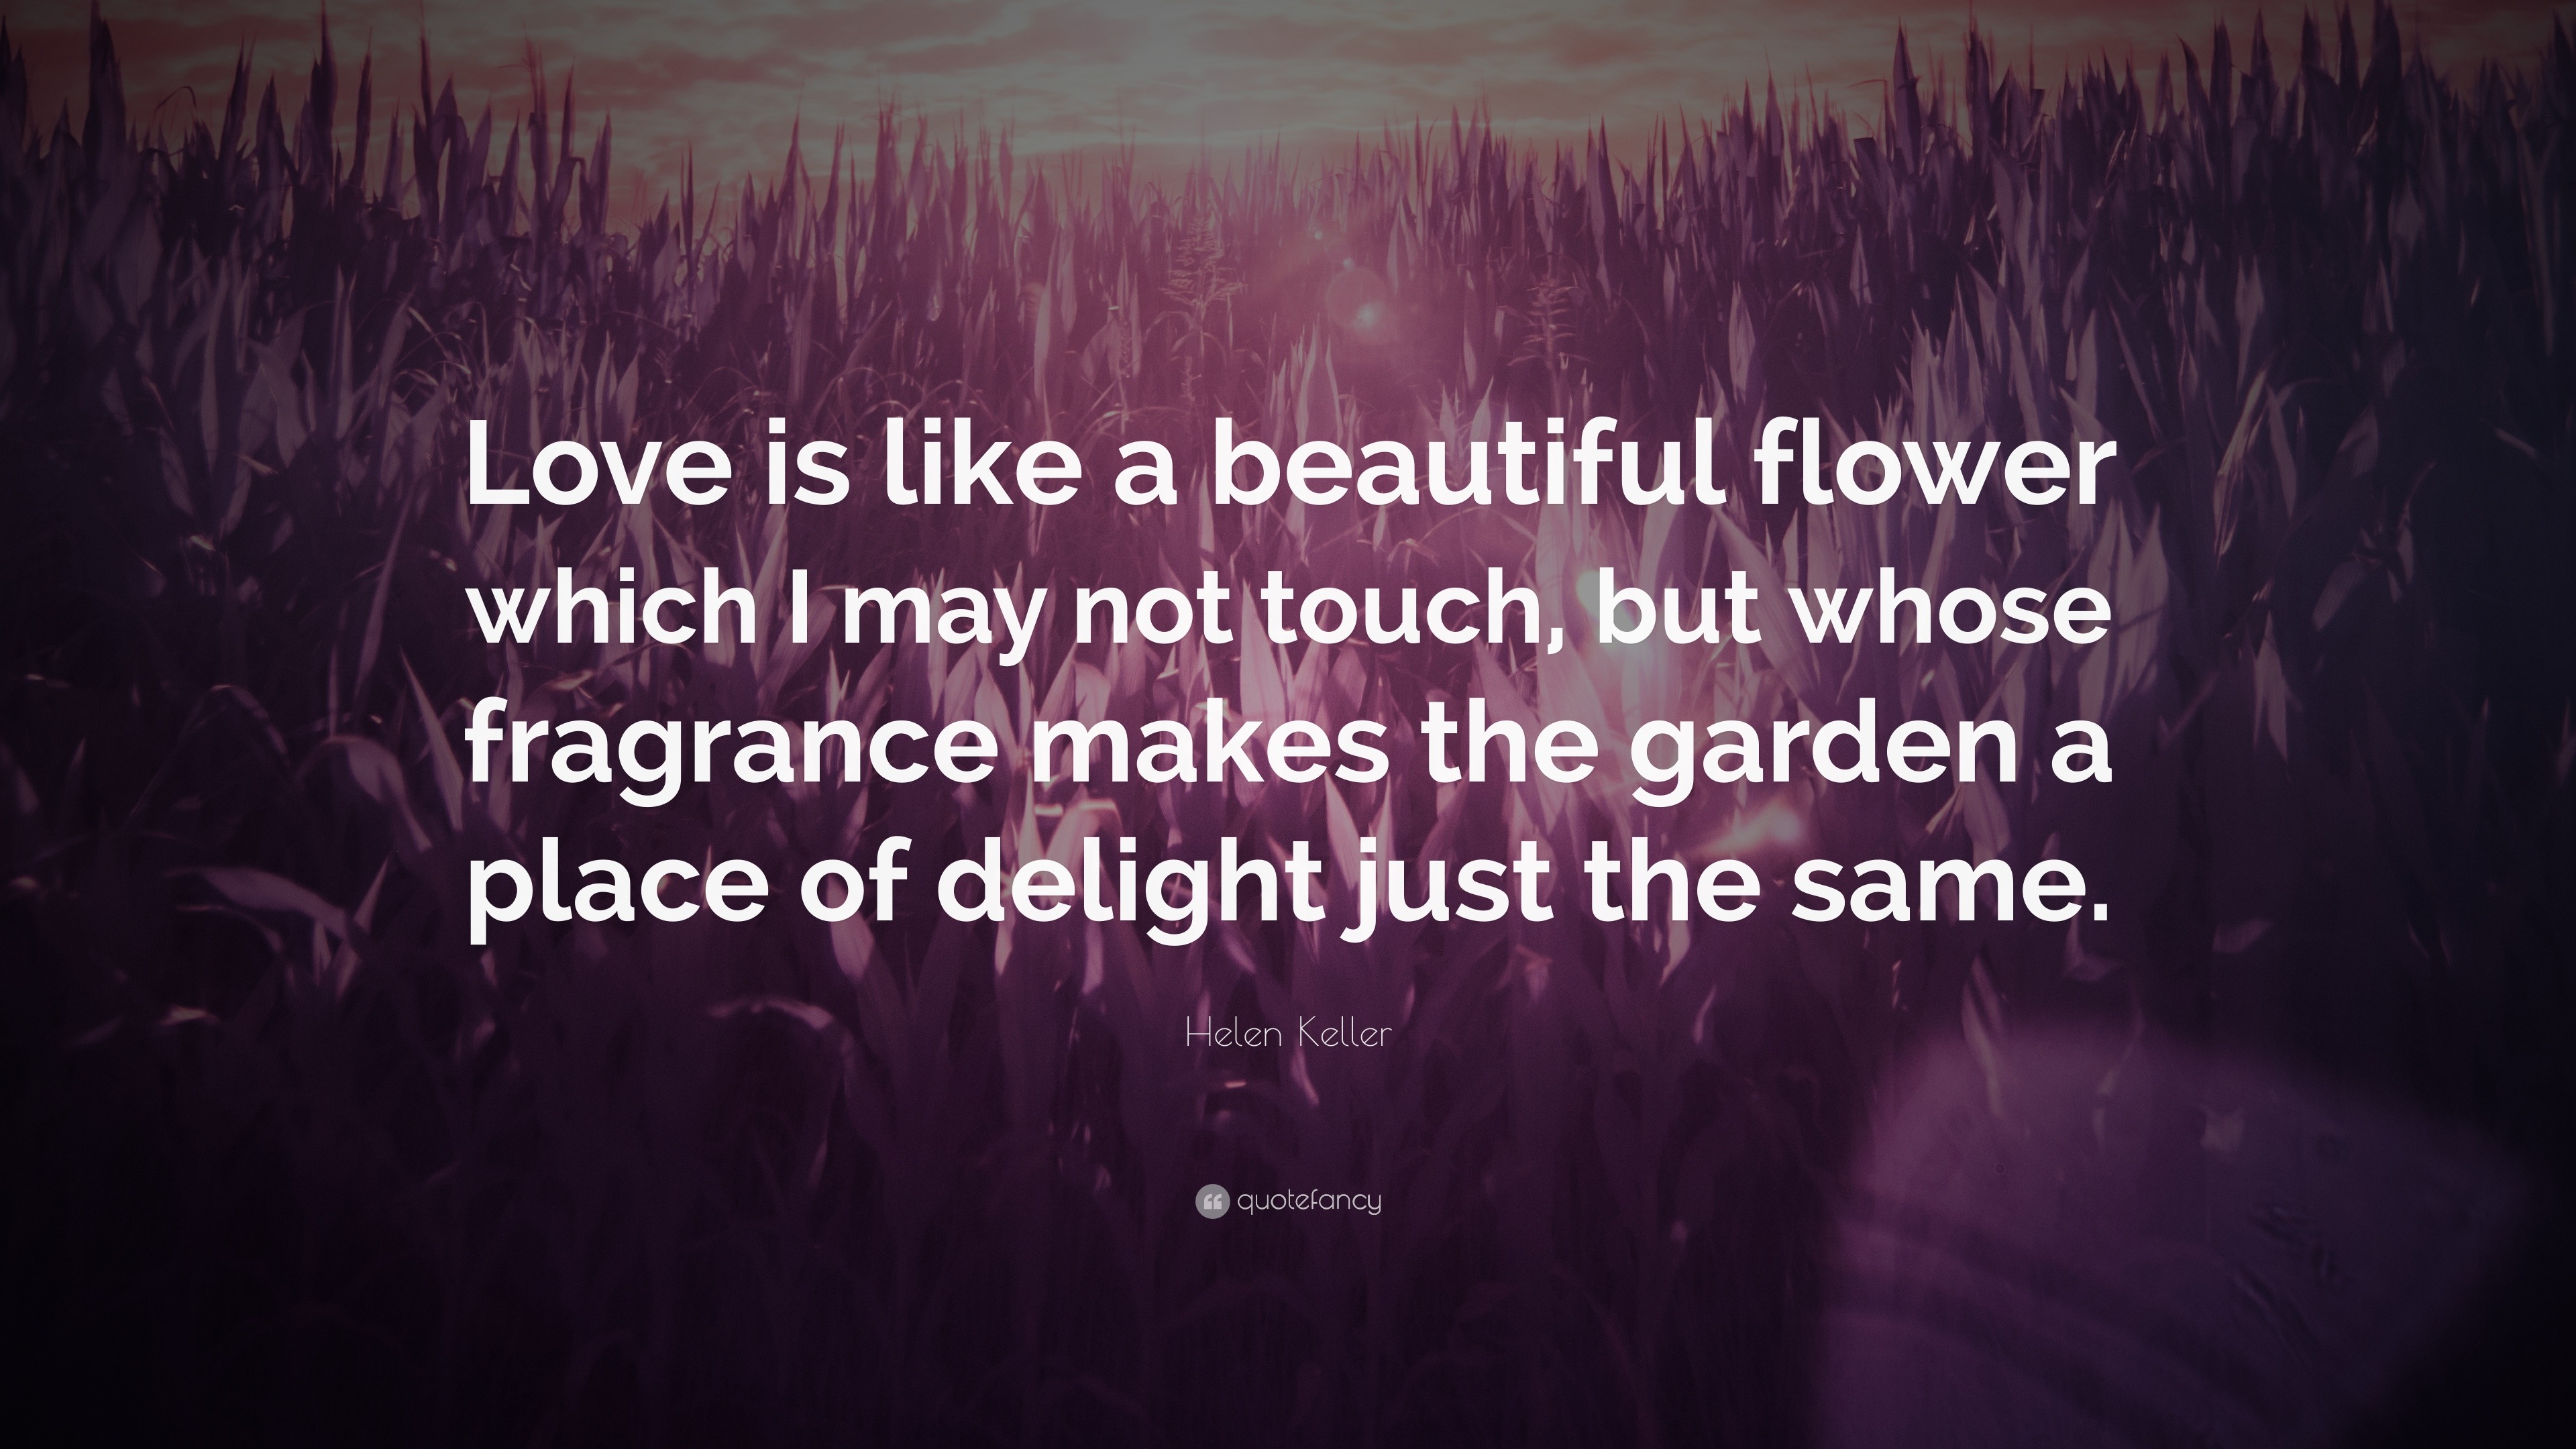 Helen Keller Quote “Love is like a beautiful flower which I may not touch